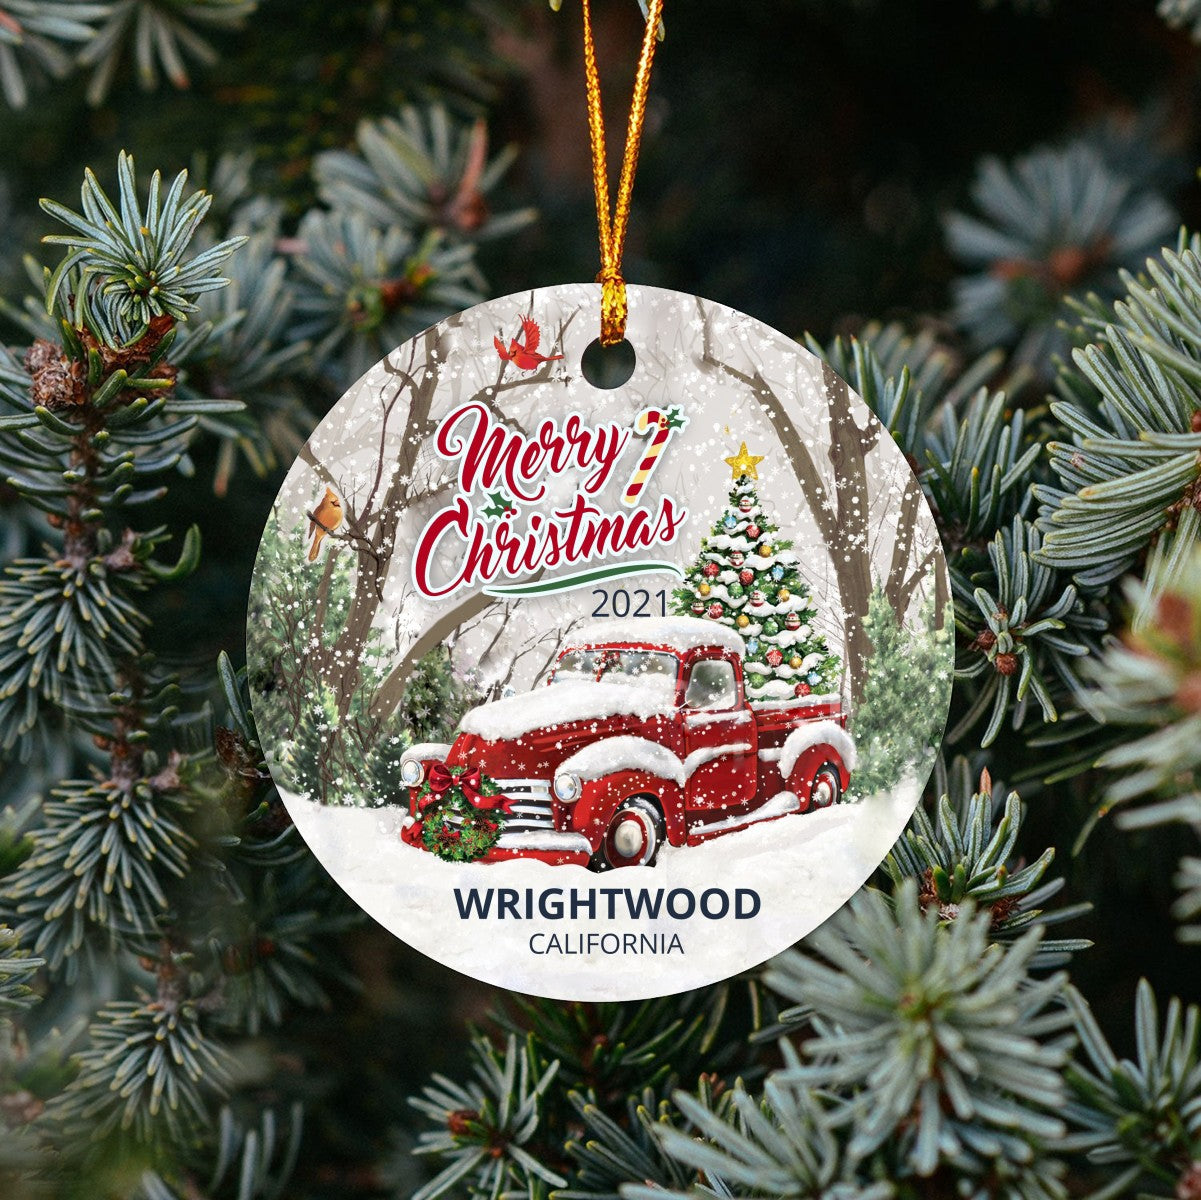 Christmas Tree Ornaments Wrightwood - Ornament With Name City, State Wrightwood California CA Ornament - Red Truck Xmas Ornaments 3'' Plastic Gift For Family, Friend And Housewarming